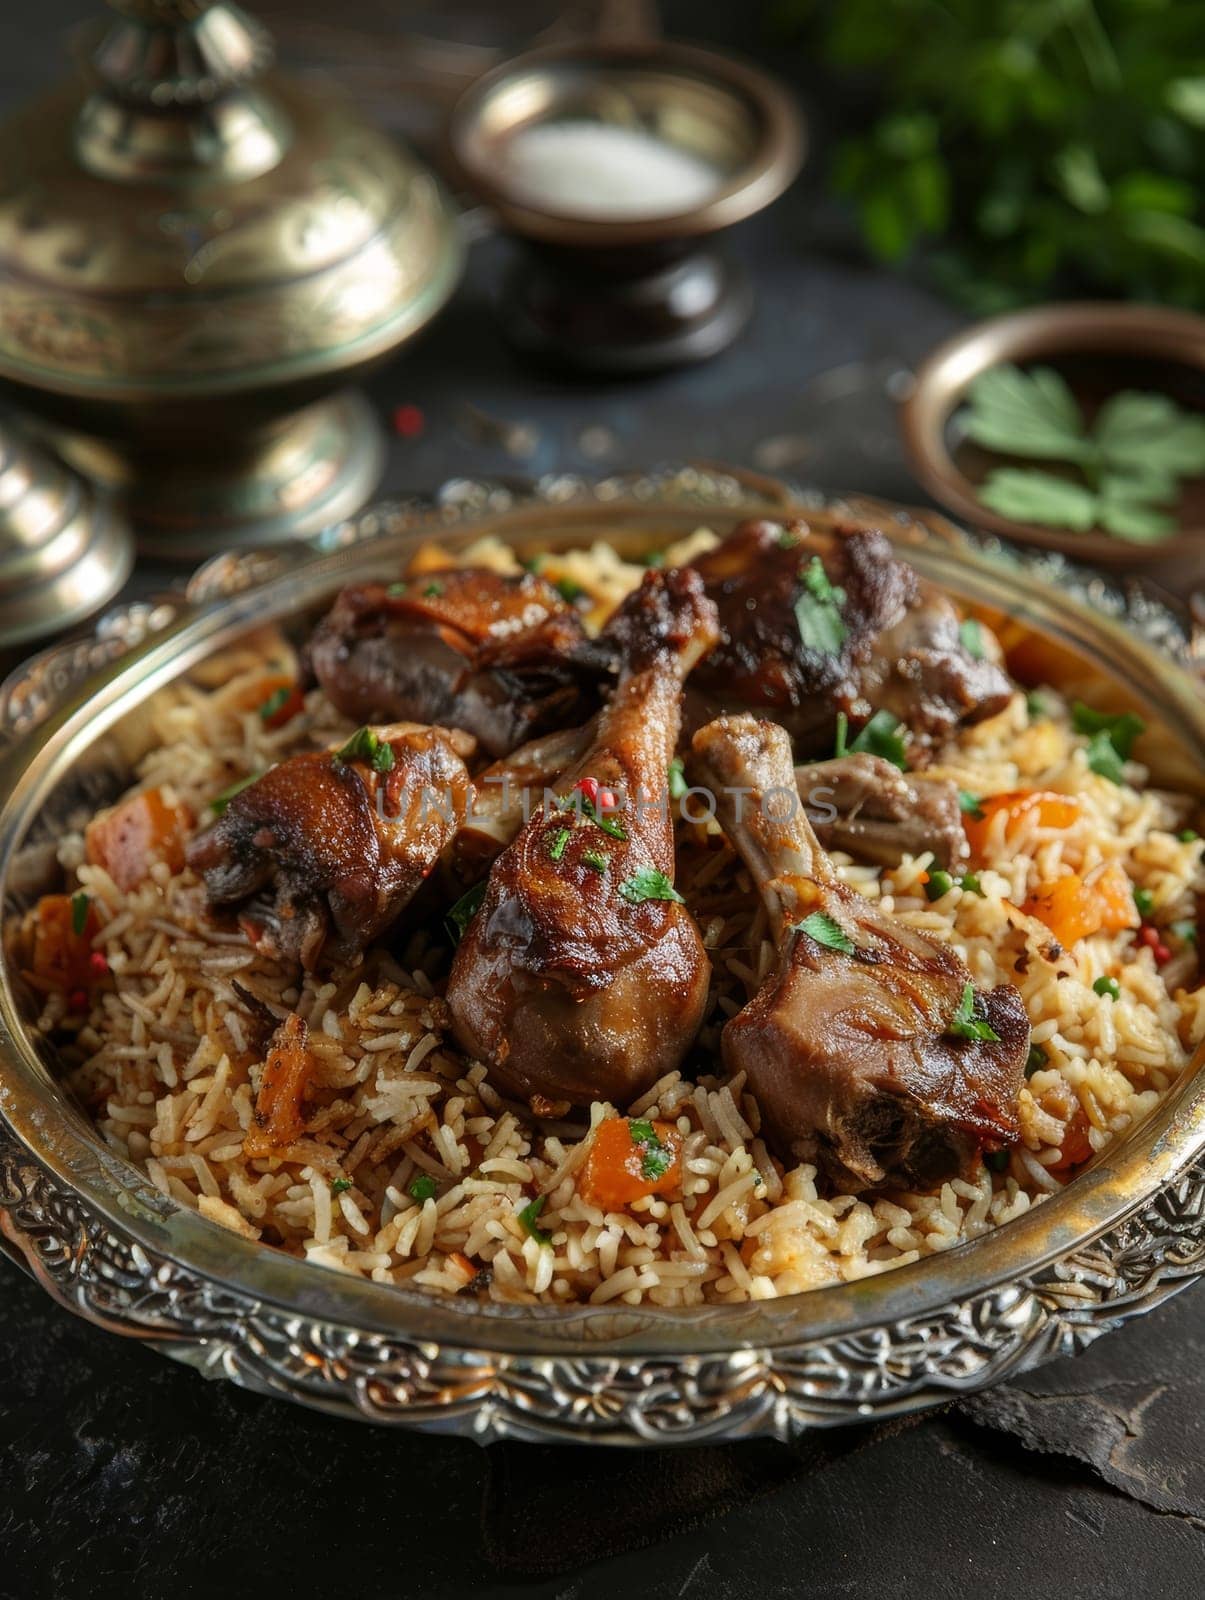 Kuwaiti machboos, spiced rice with chicken or lamb, served on a decorative plate. A traditional and flavorful dish from Kuwait. by sfinks